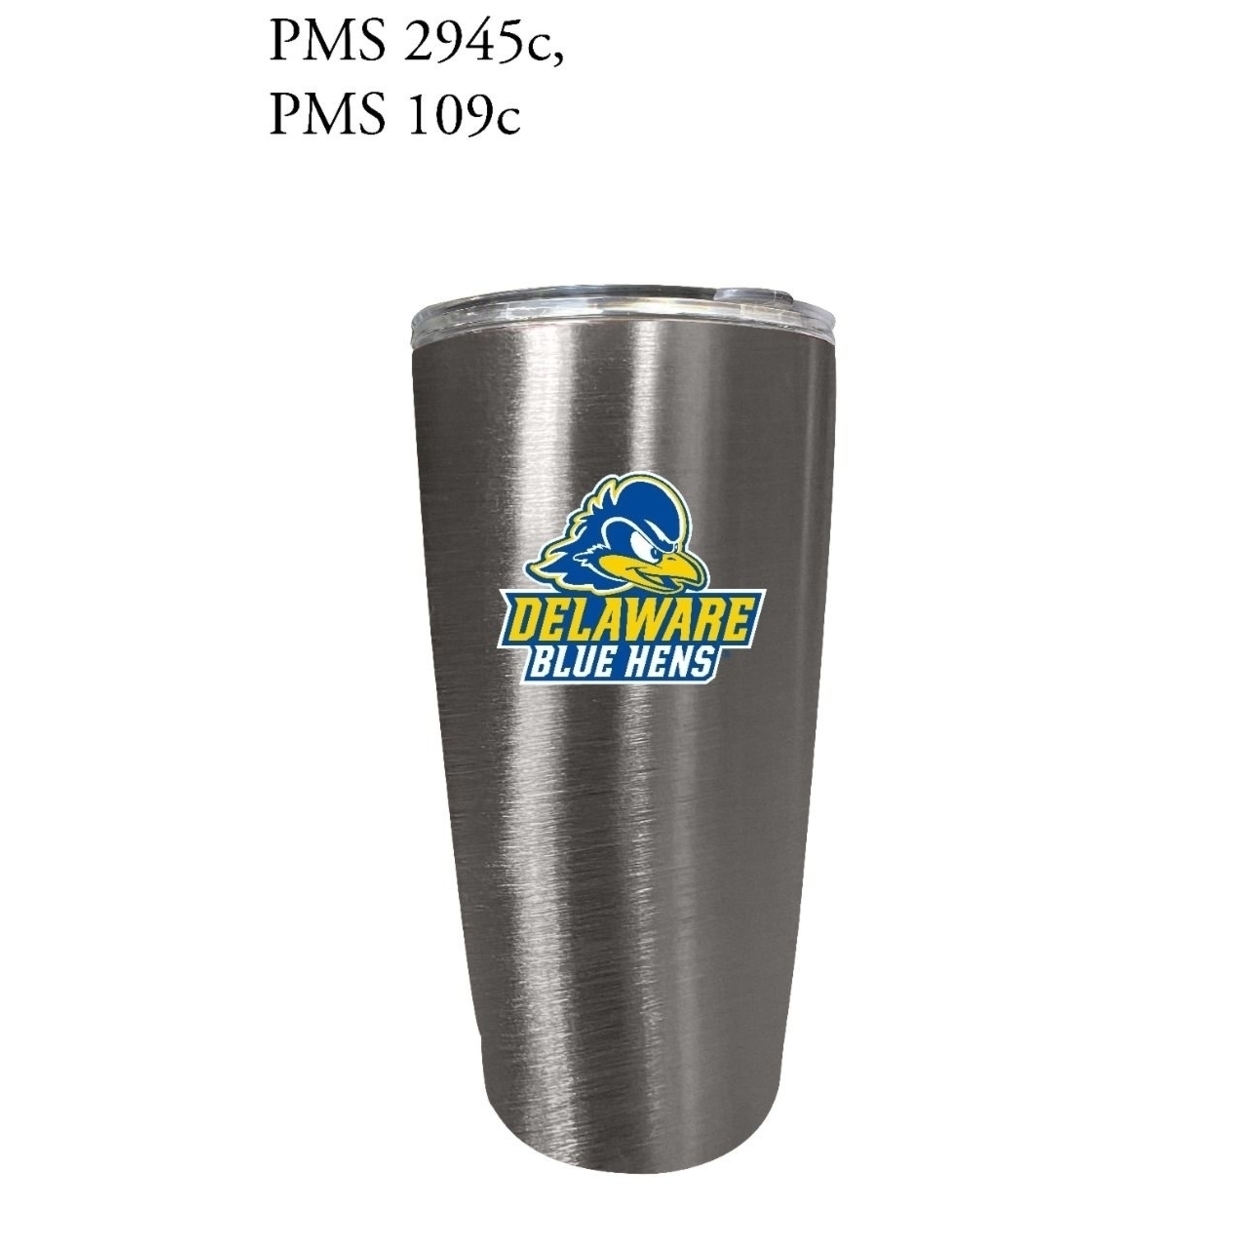 Delaware Blue Hens 16 Oz Insulated Stainless Steel Tumbler Colorless